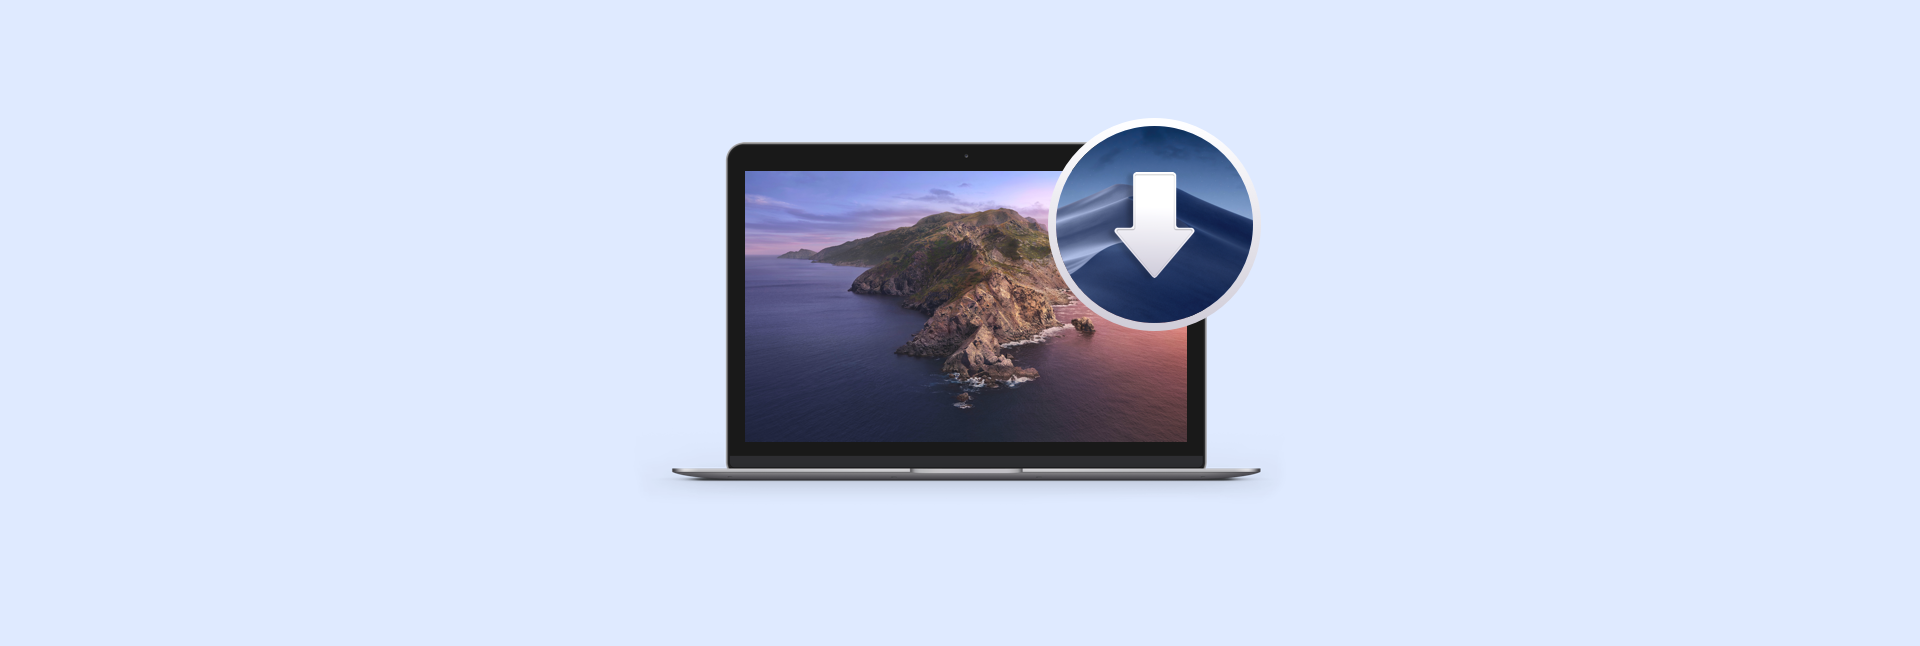 how to roll back apple mac update